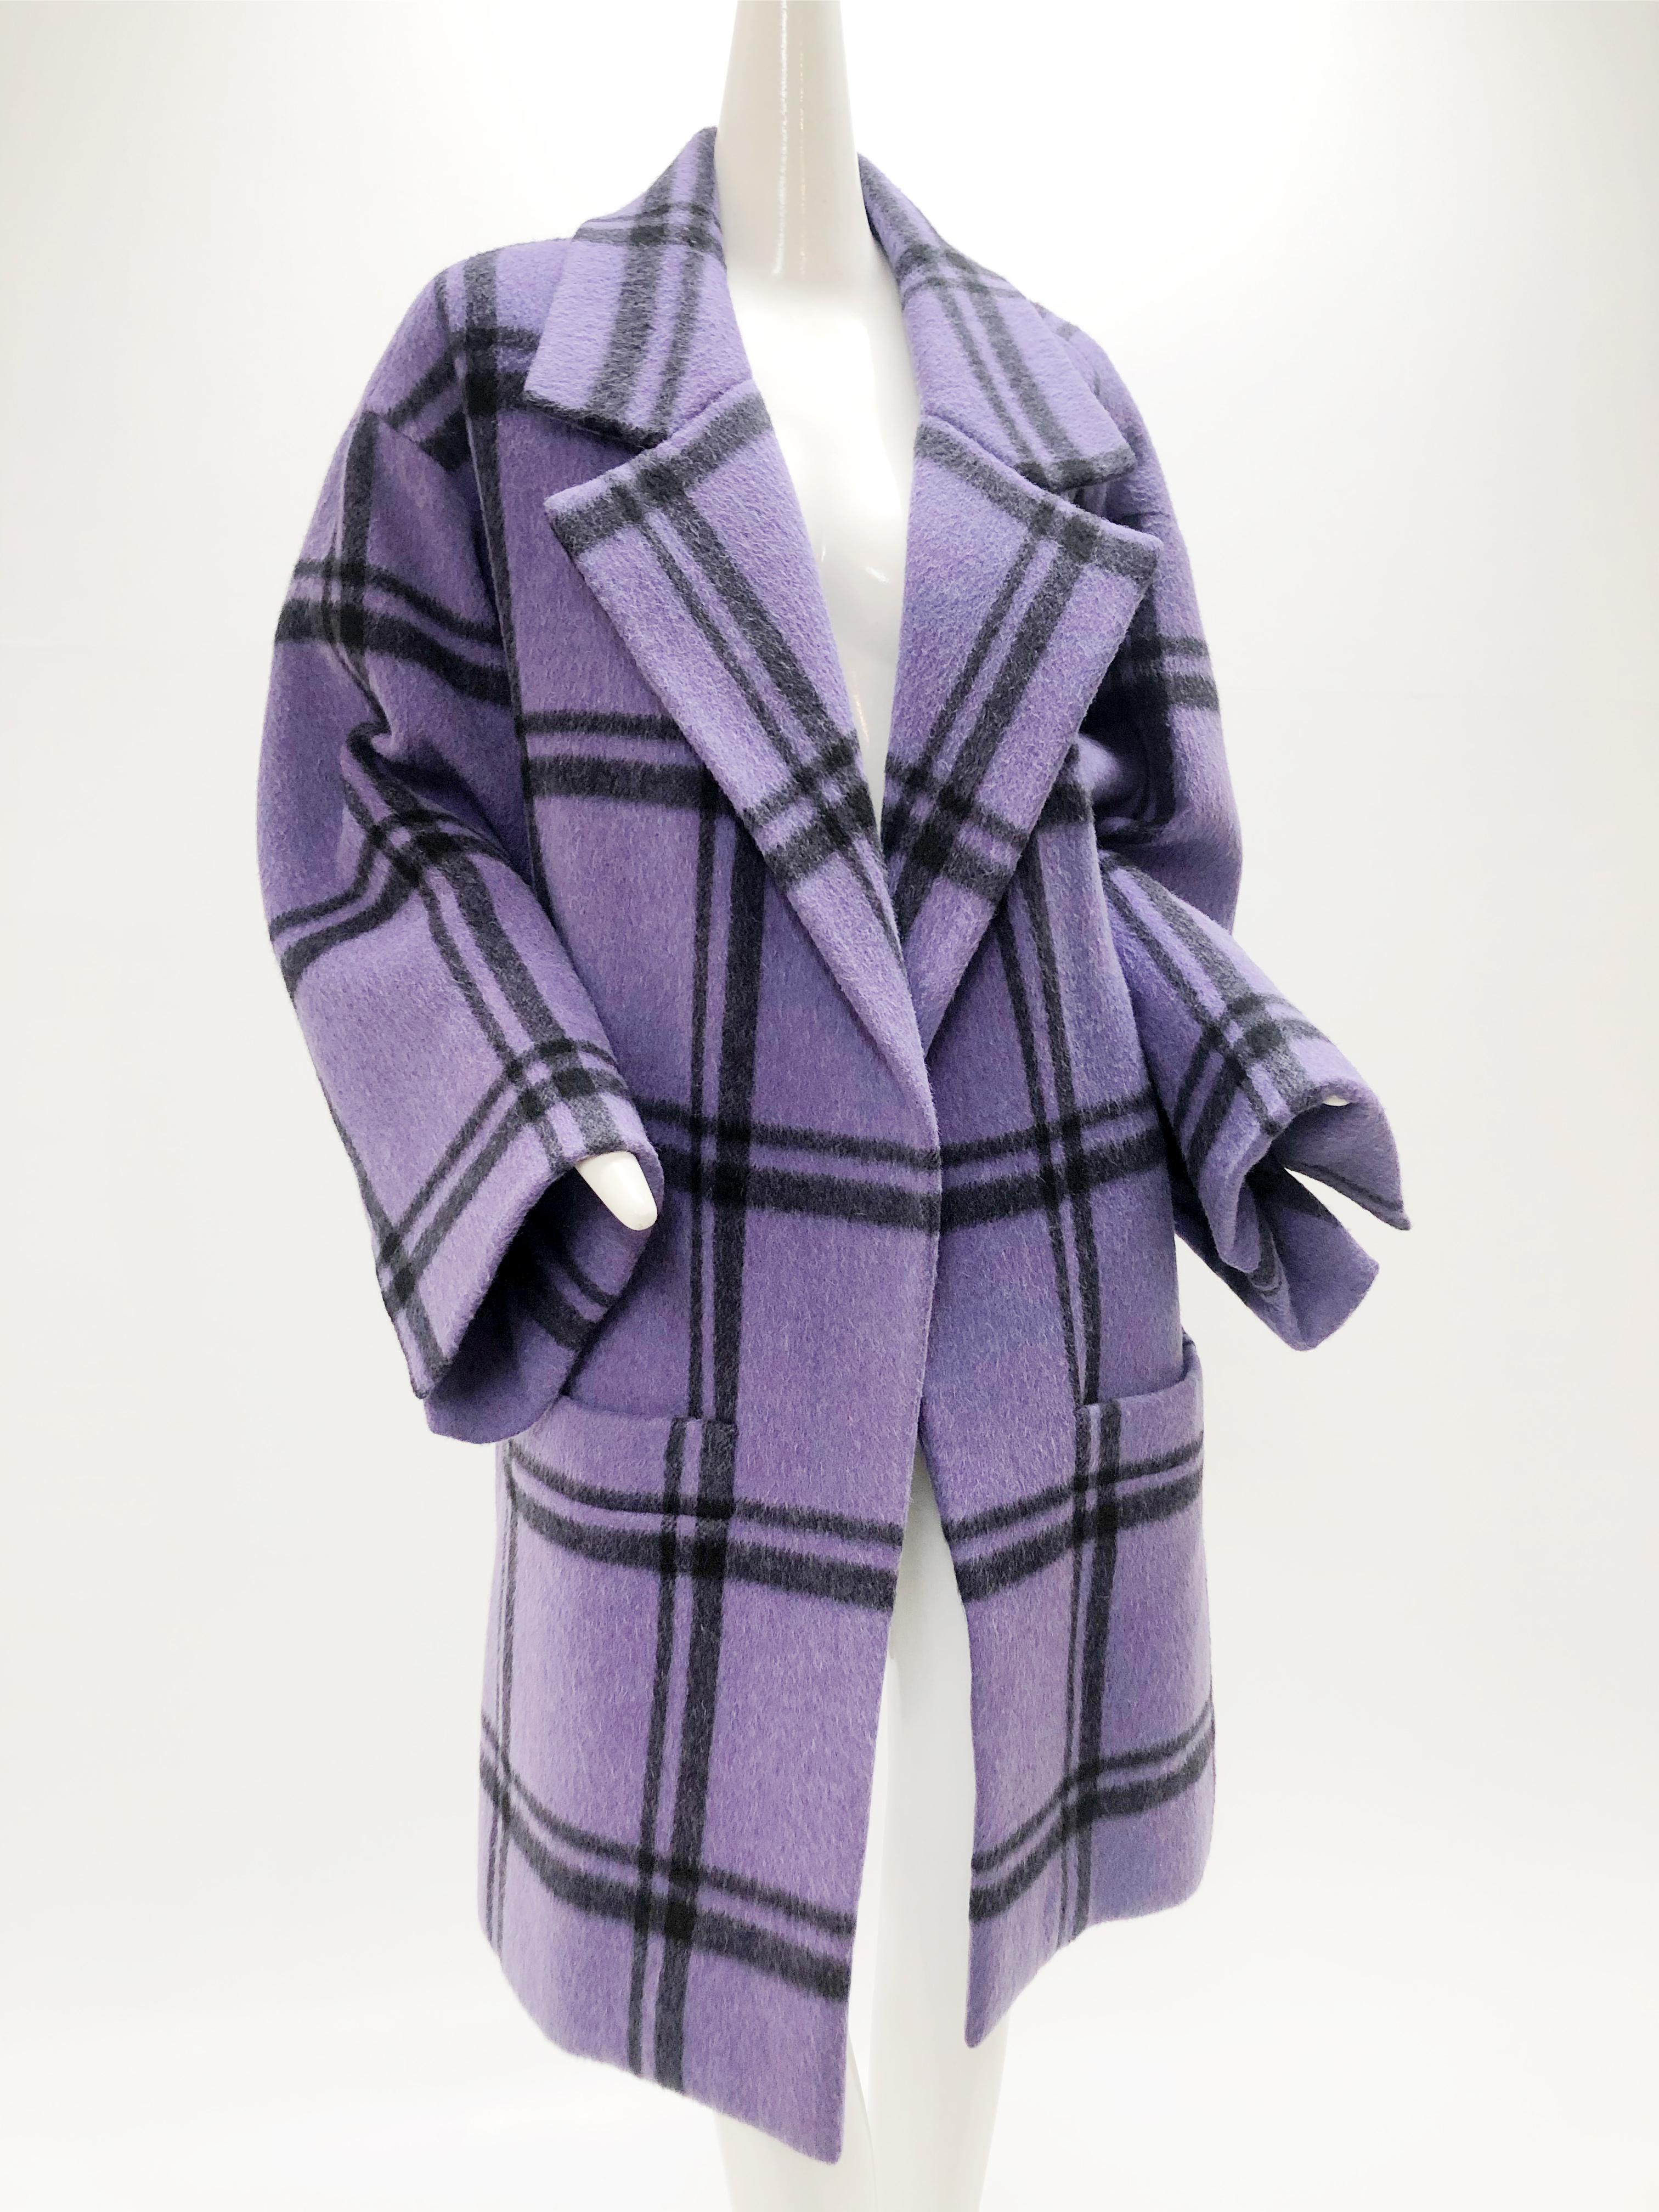 A fabulous 1985 couture Marc Bohan for Christian Dior soft and silky (not scratchy at all) mohair purple and black window pane plaid oversized swing coat: No closures with pattern-matched front patch pockets at hem line. Black silk lining.